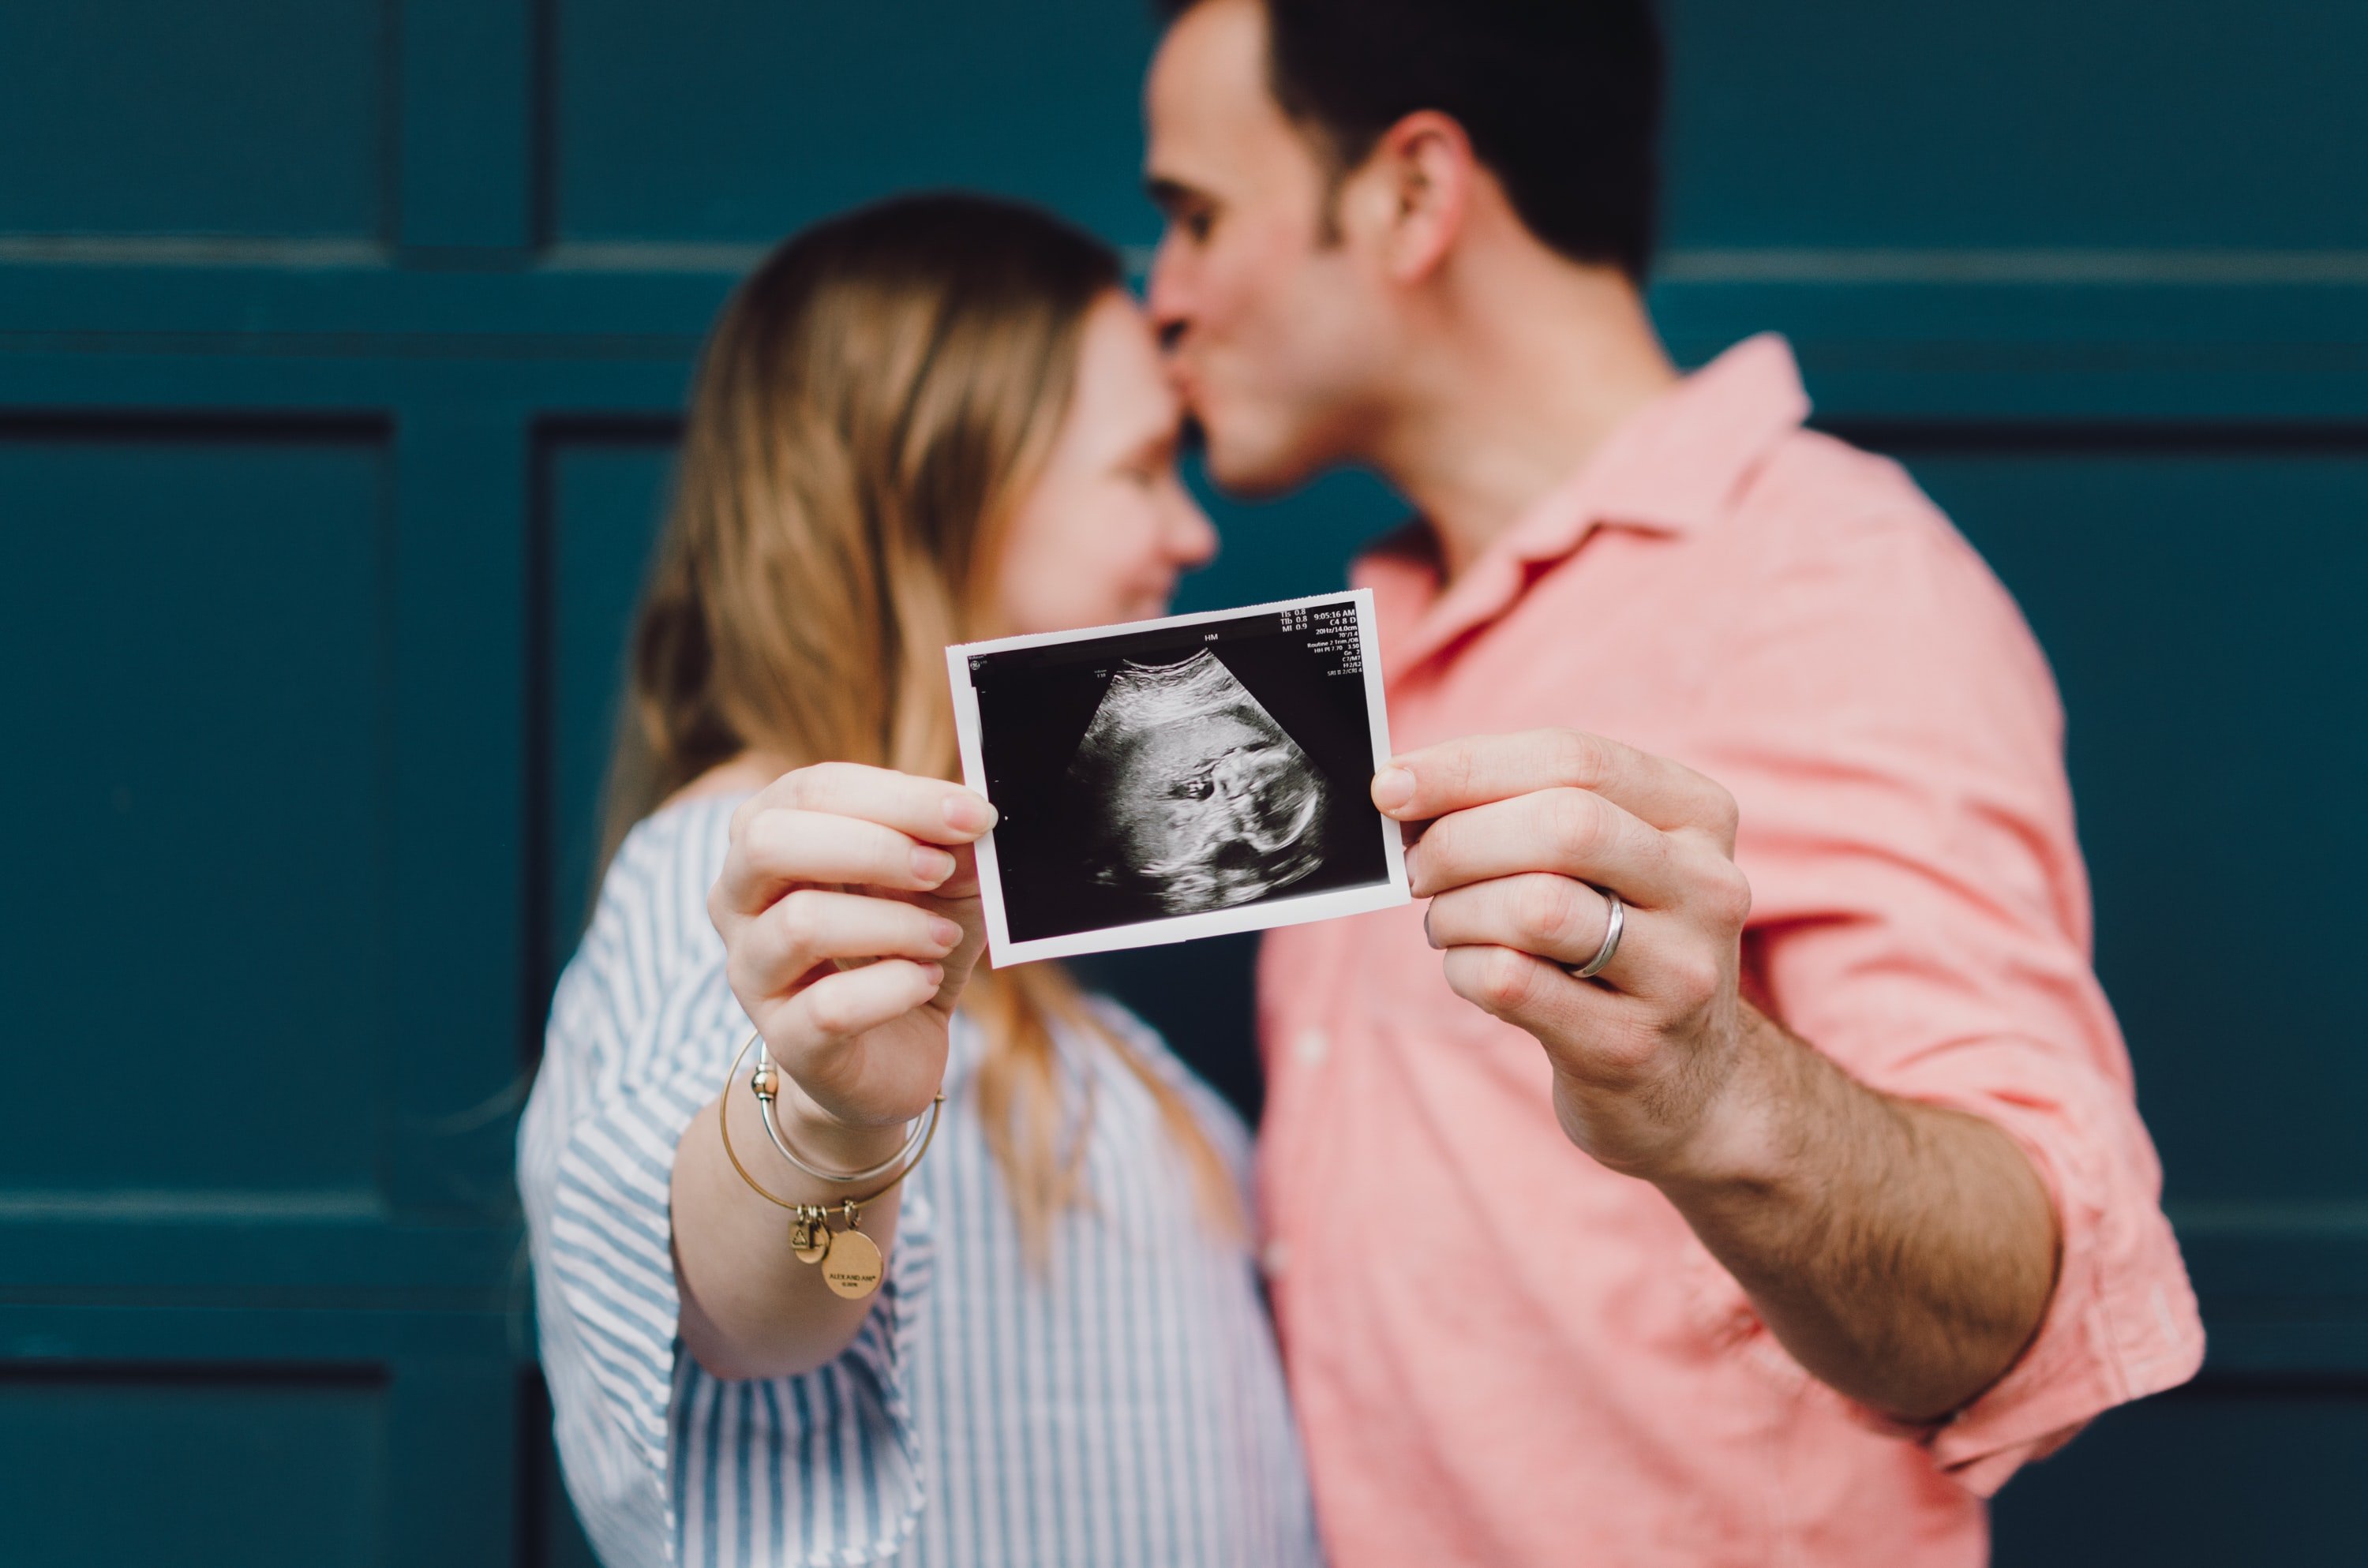 Catherine's son told her she was going to be a grandmother. | Source: Unsplash